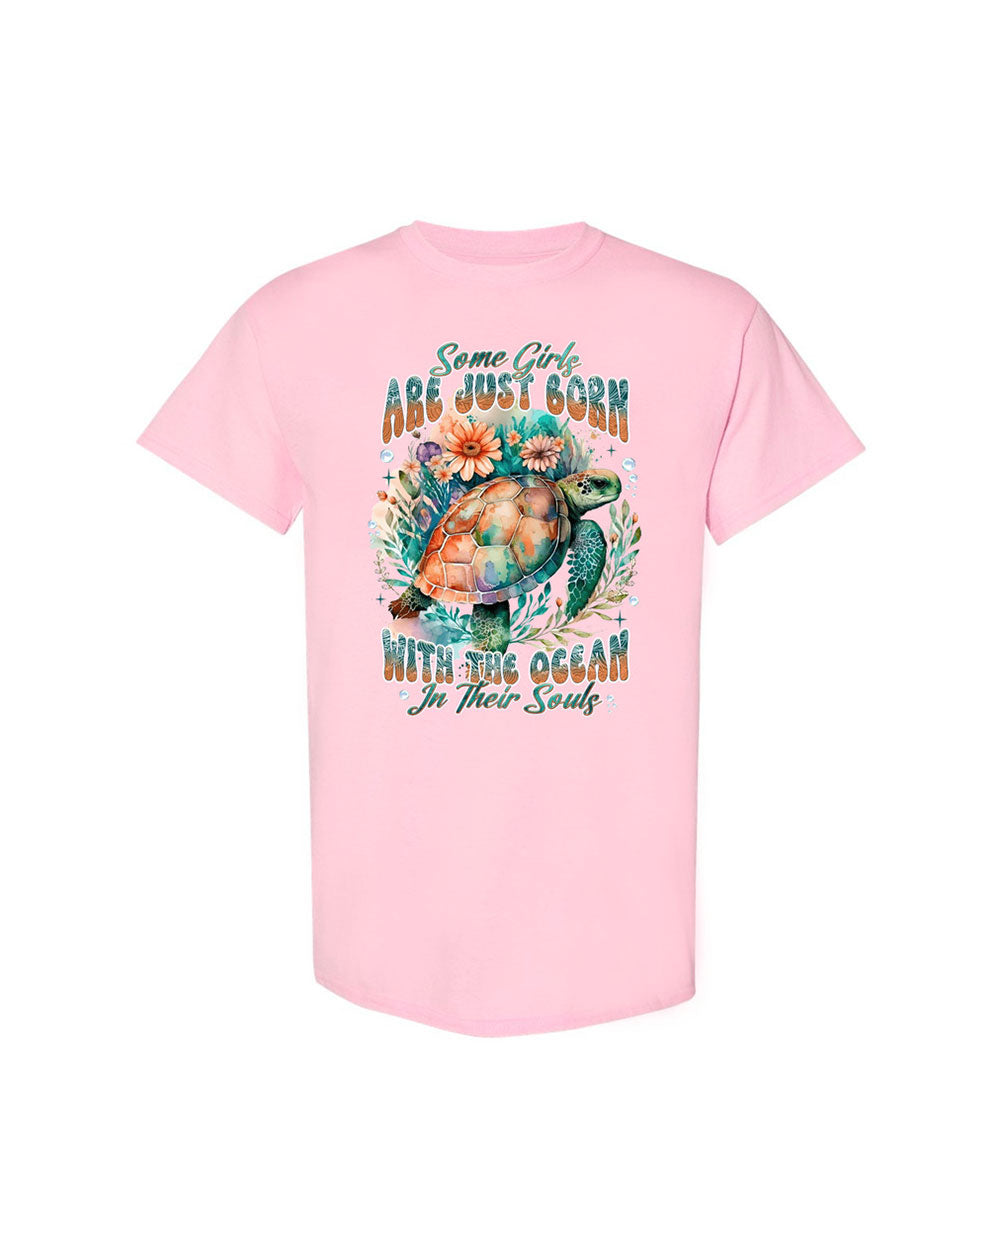 SOME GIRLS ARE JUST BORN TURLTE WATERCOLOR COTTON SHIRT - TLNT1104246